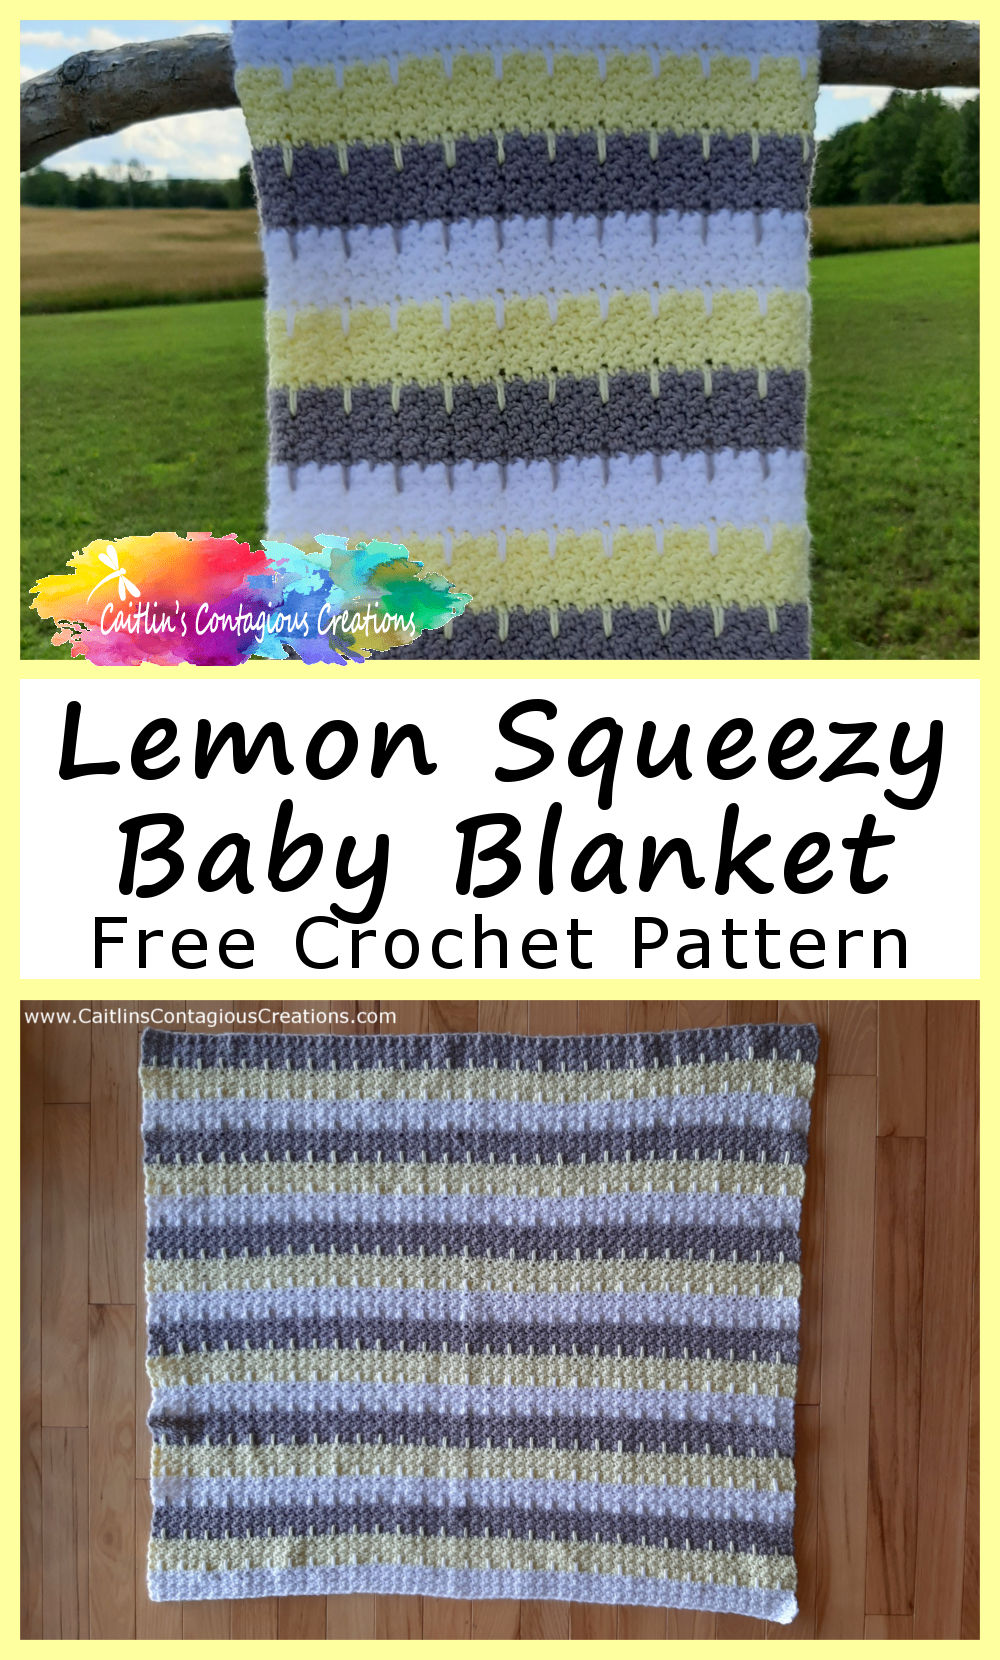 Photos of finished baby blanket on a wood floor and hanging outside with text overlay "Lemon Squeezy Baby Blanket"